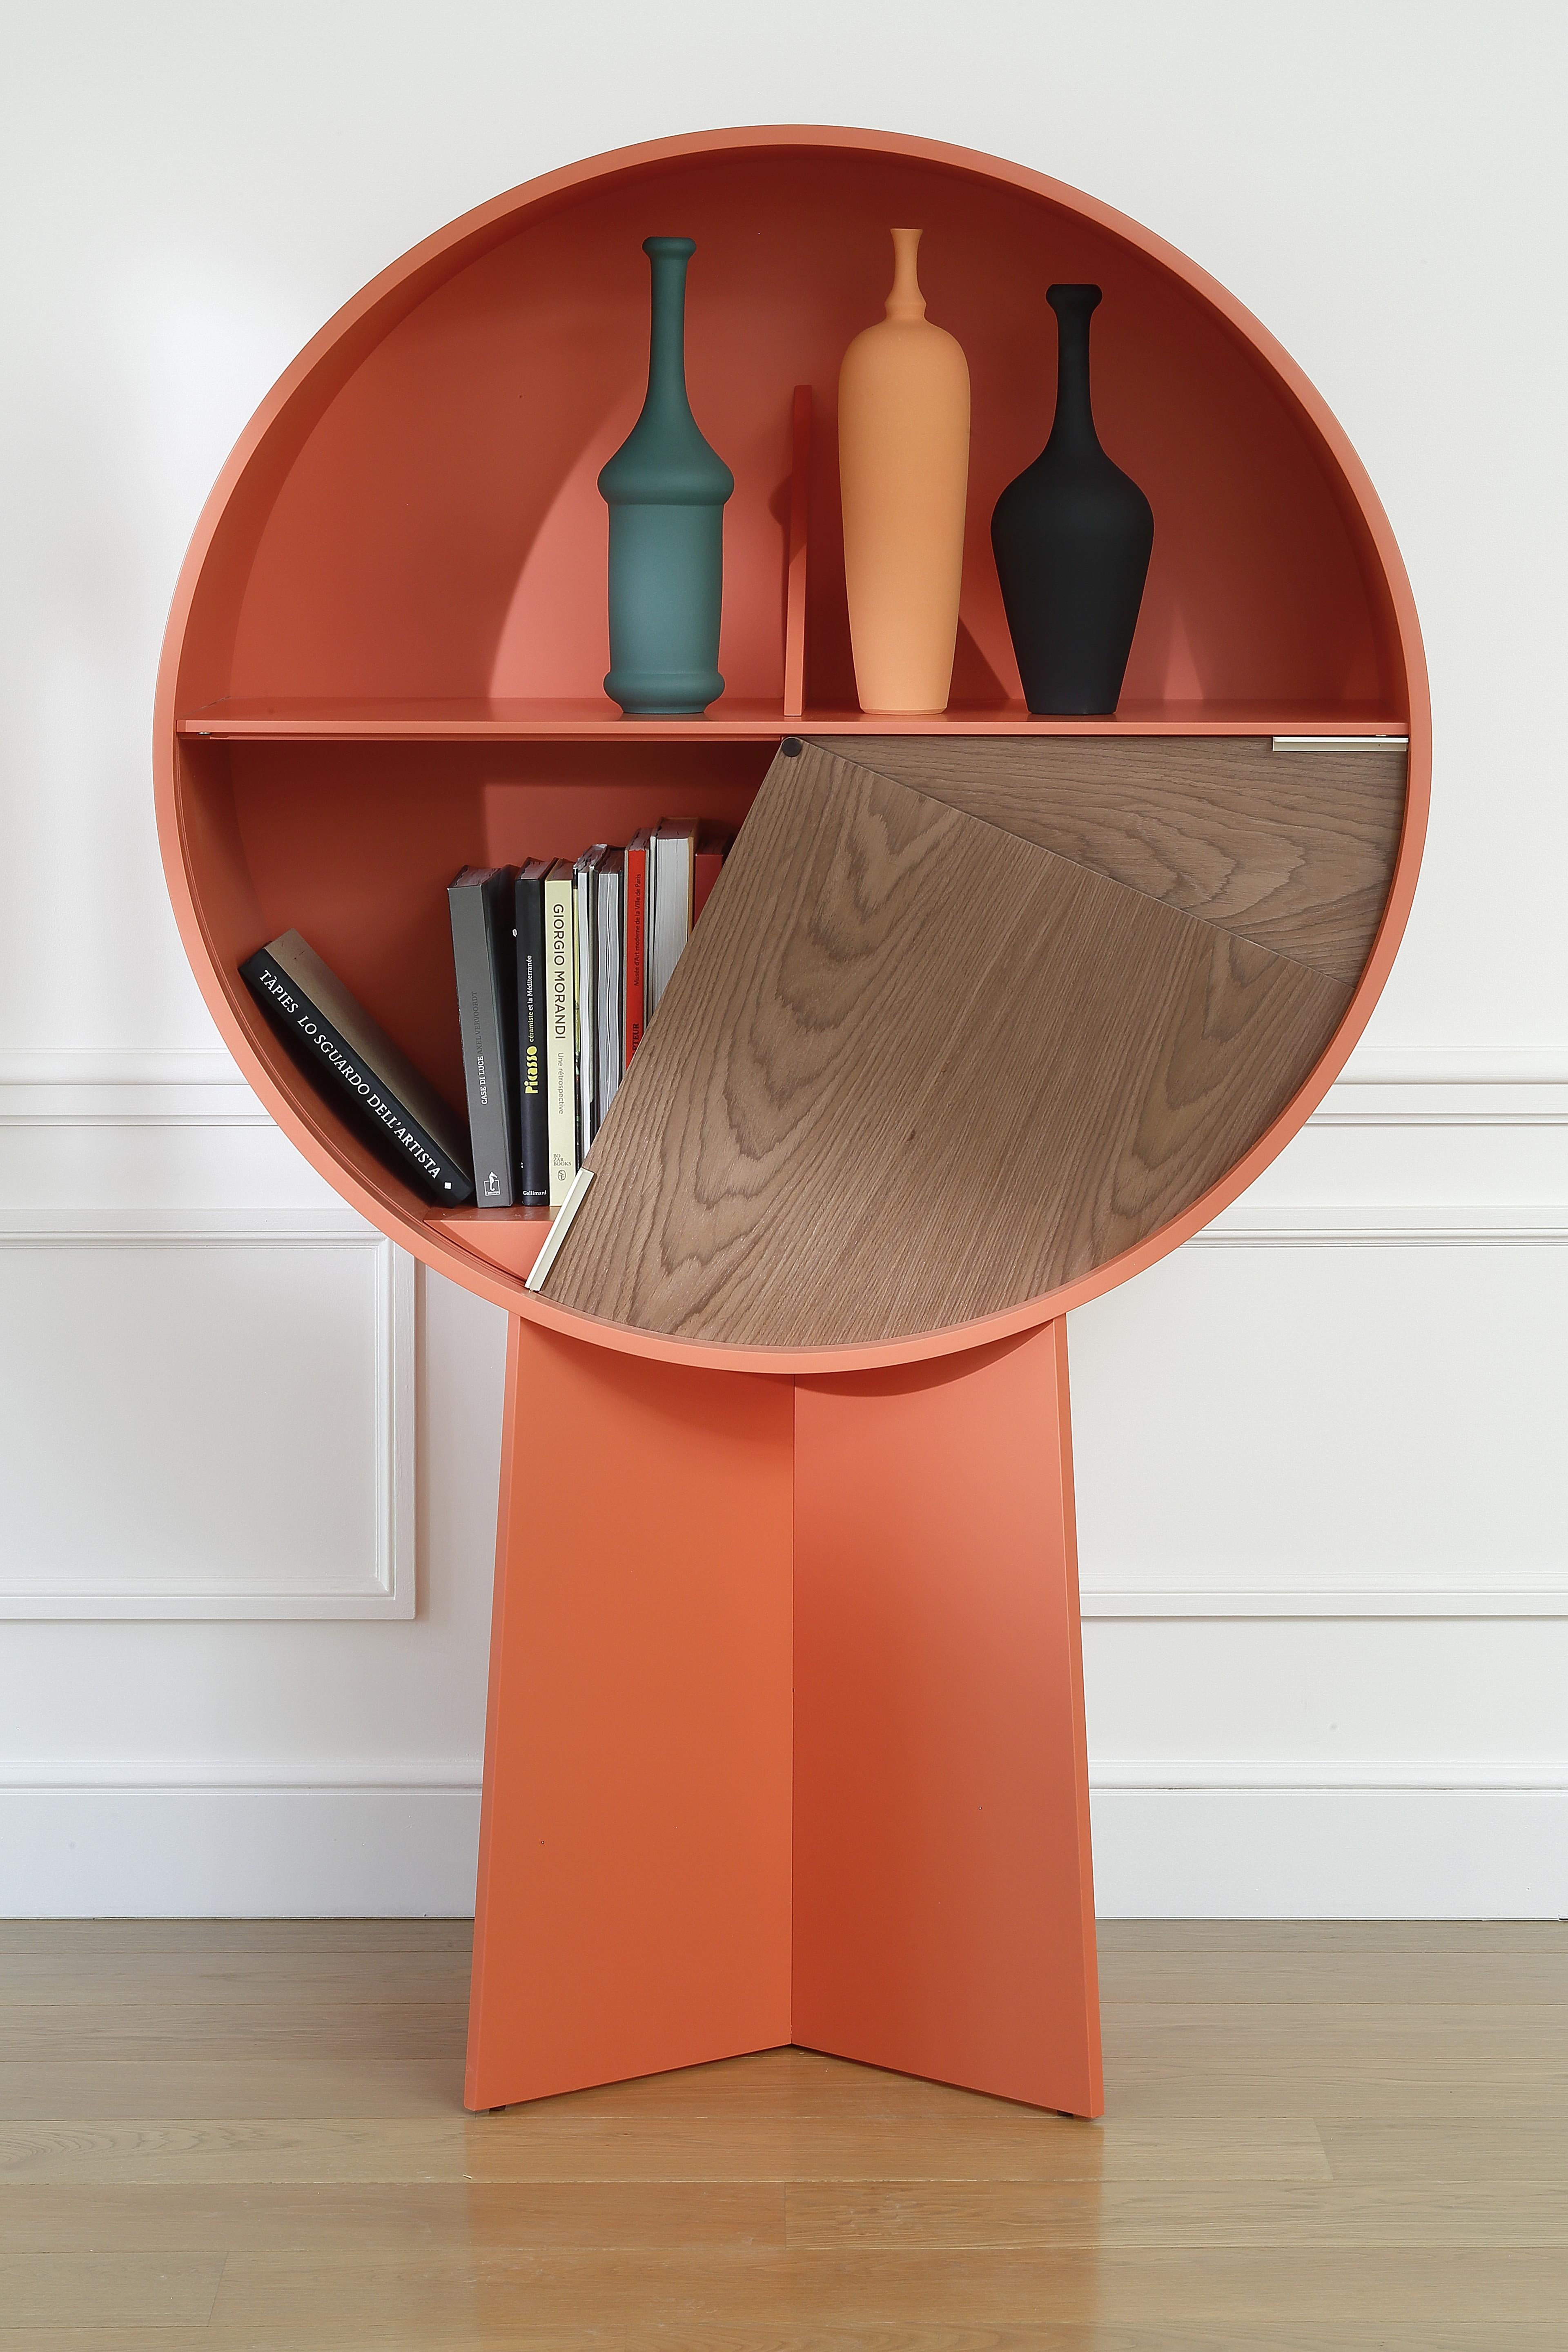 Orange Luna walnut cabinet by Patricia Urquiola
Materials: Walnut veneer on MDF
Dimensions: 110 x 40 x 175 cm

The Luna is a strong and creative piece, in walnut veneer or in orange lacquered medium, with 2 sliding doors. It is a colorful